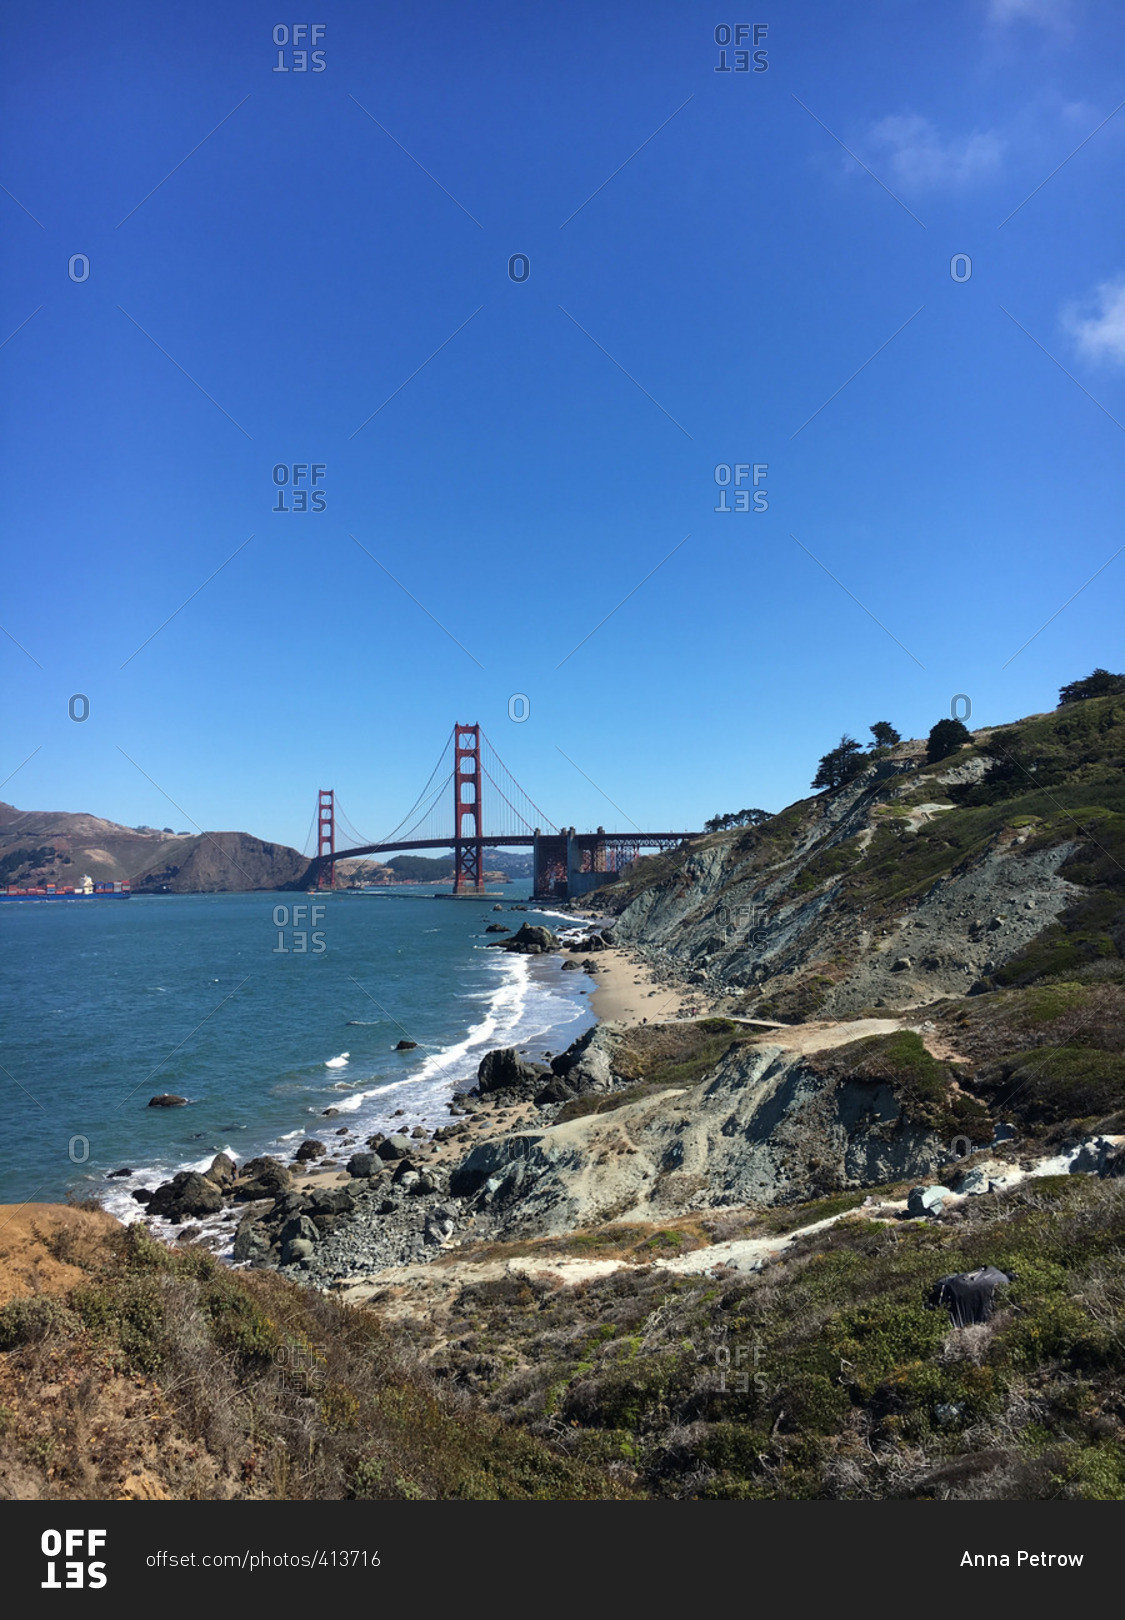 Hiking trails in Golden Gate National Recreation Area, California